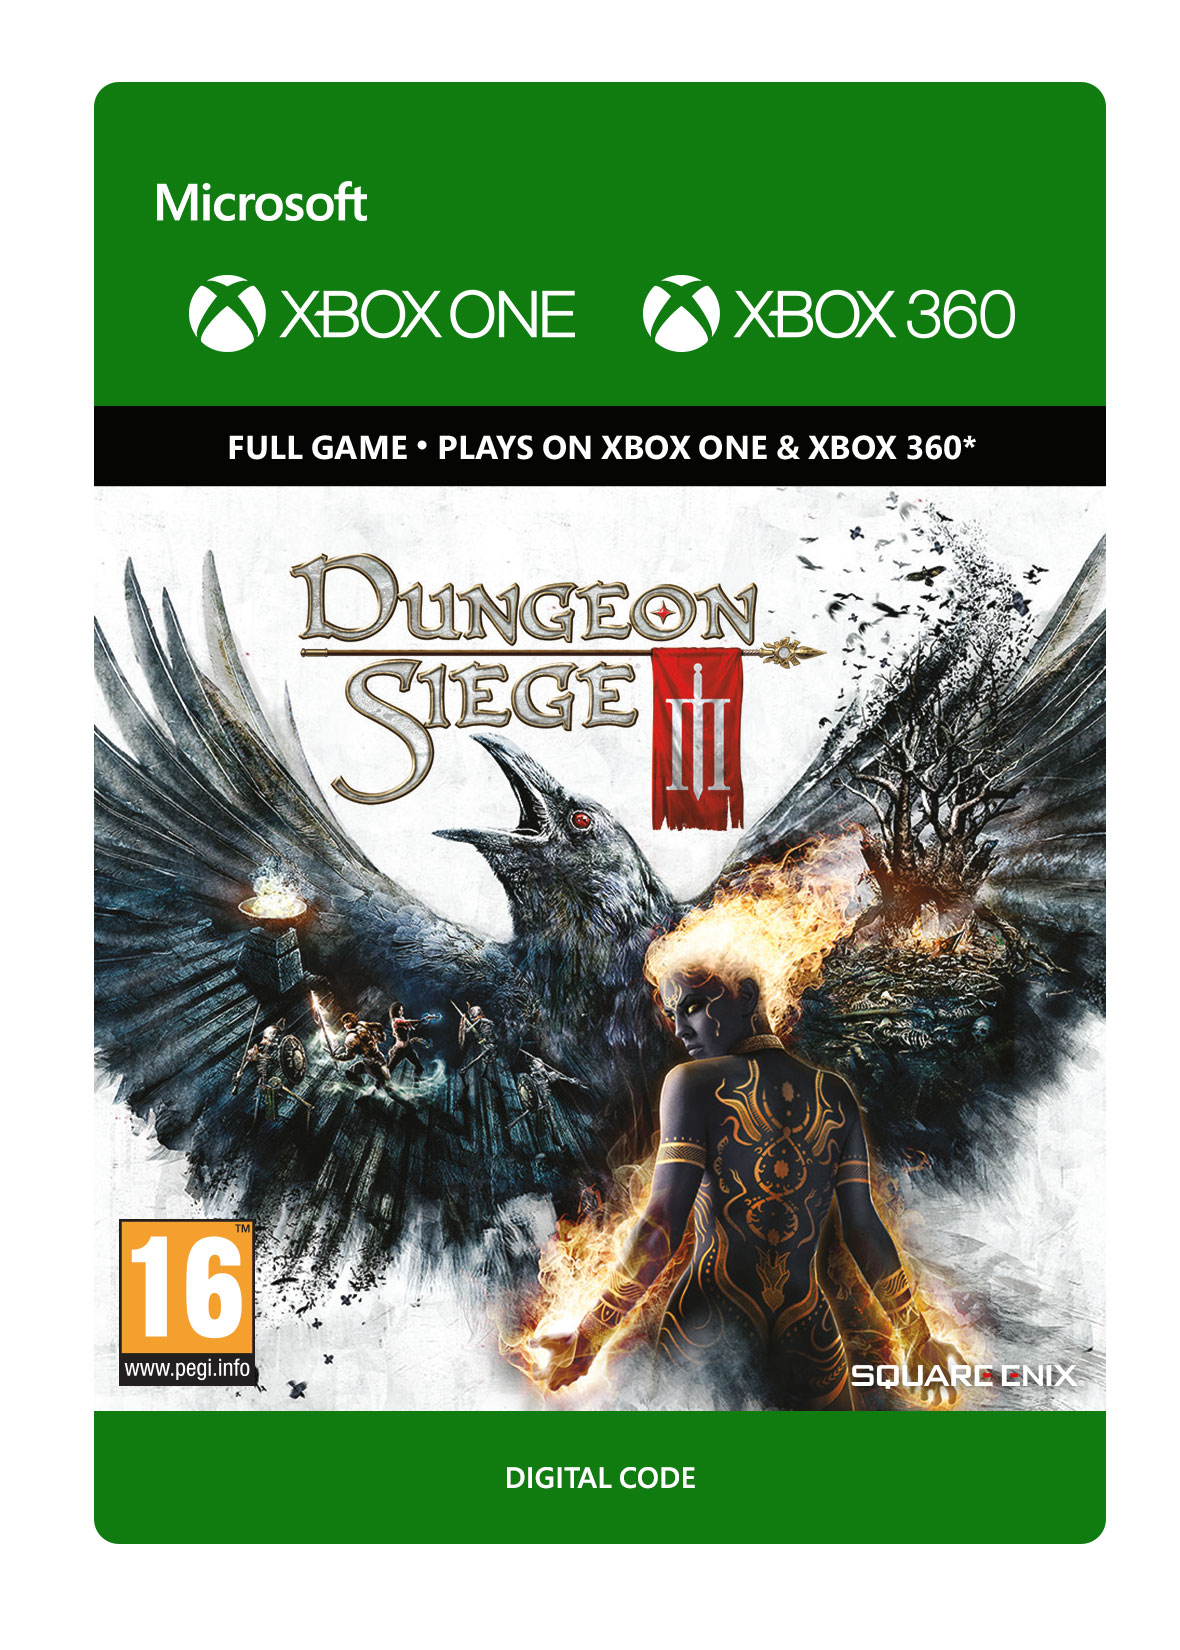 Download Dungeon Siege III now for free on Xbox 360 AND Xbox One